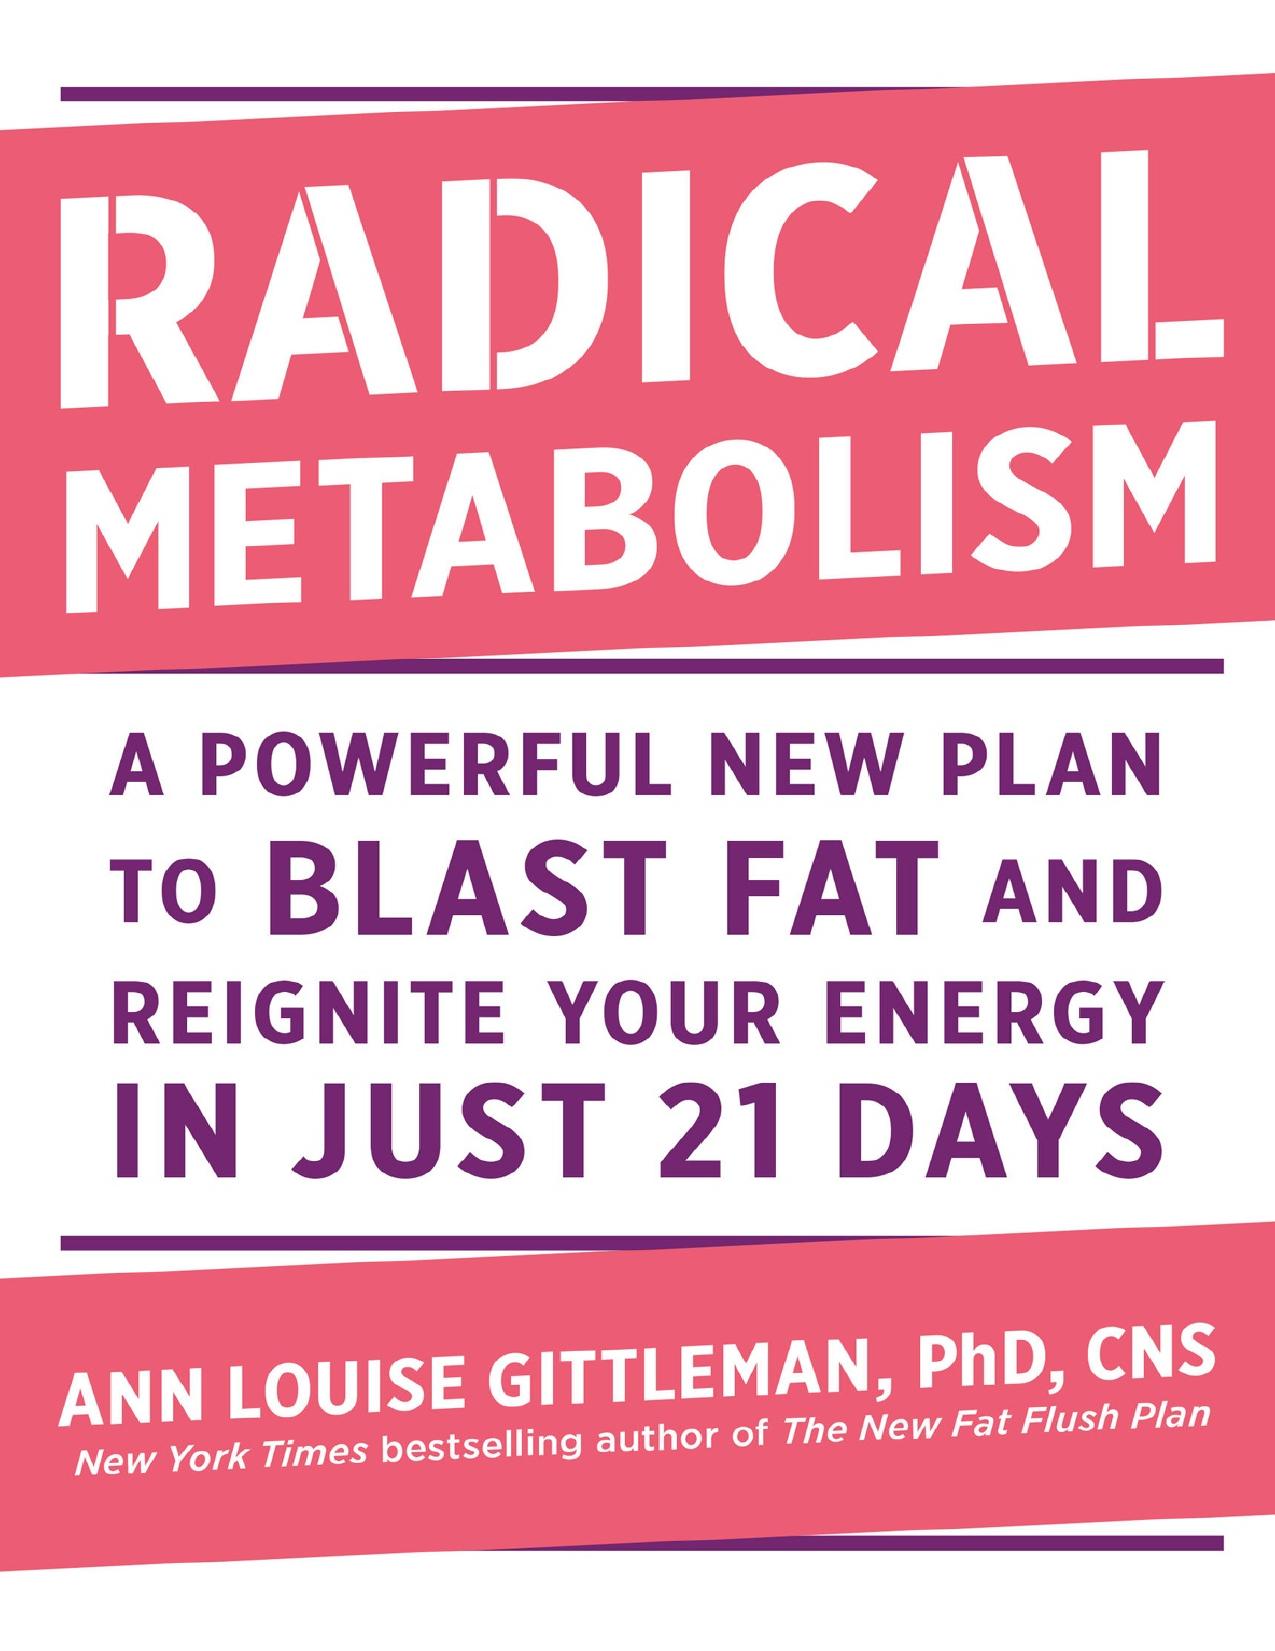 Radical Metabolism A Powerful New Plan to Blast Fat and Reignite Your Energy in Just 21 Days - PDFDrive.com